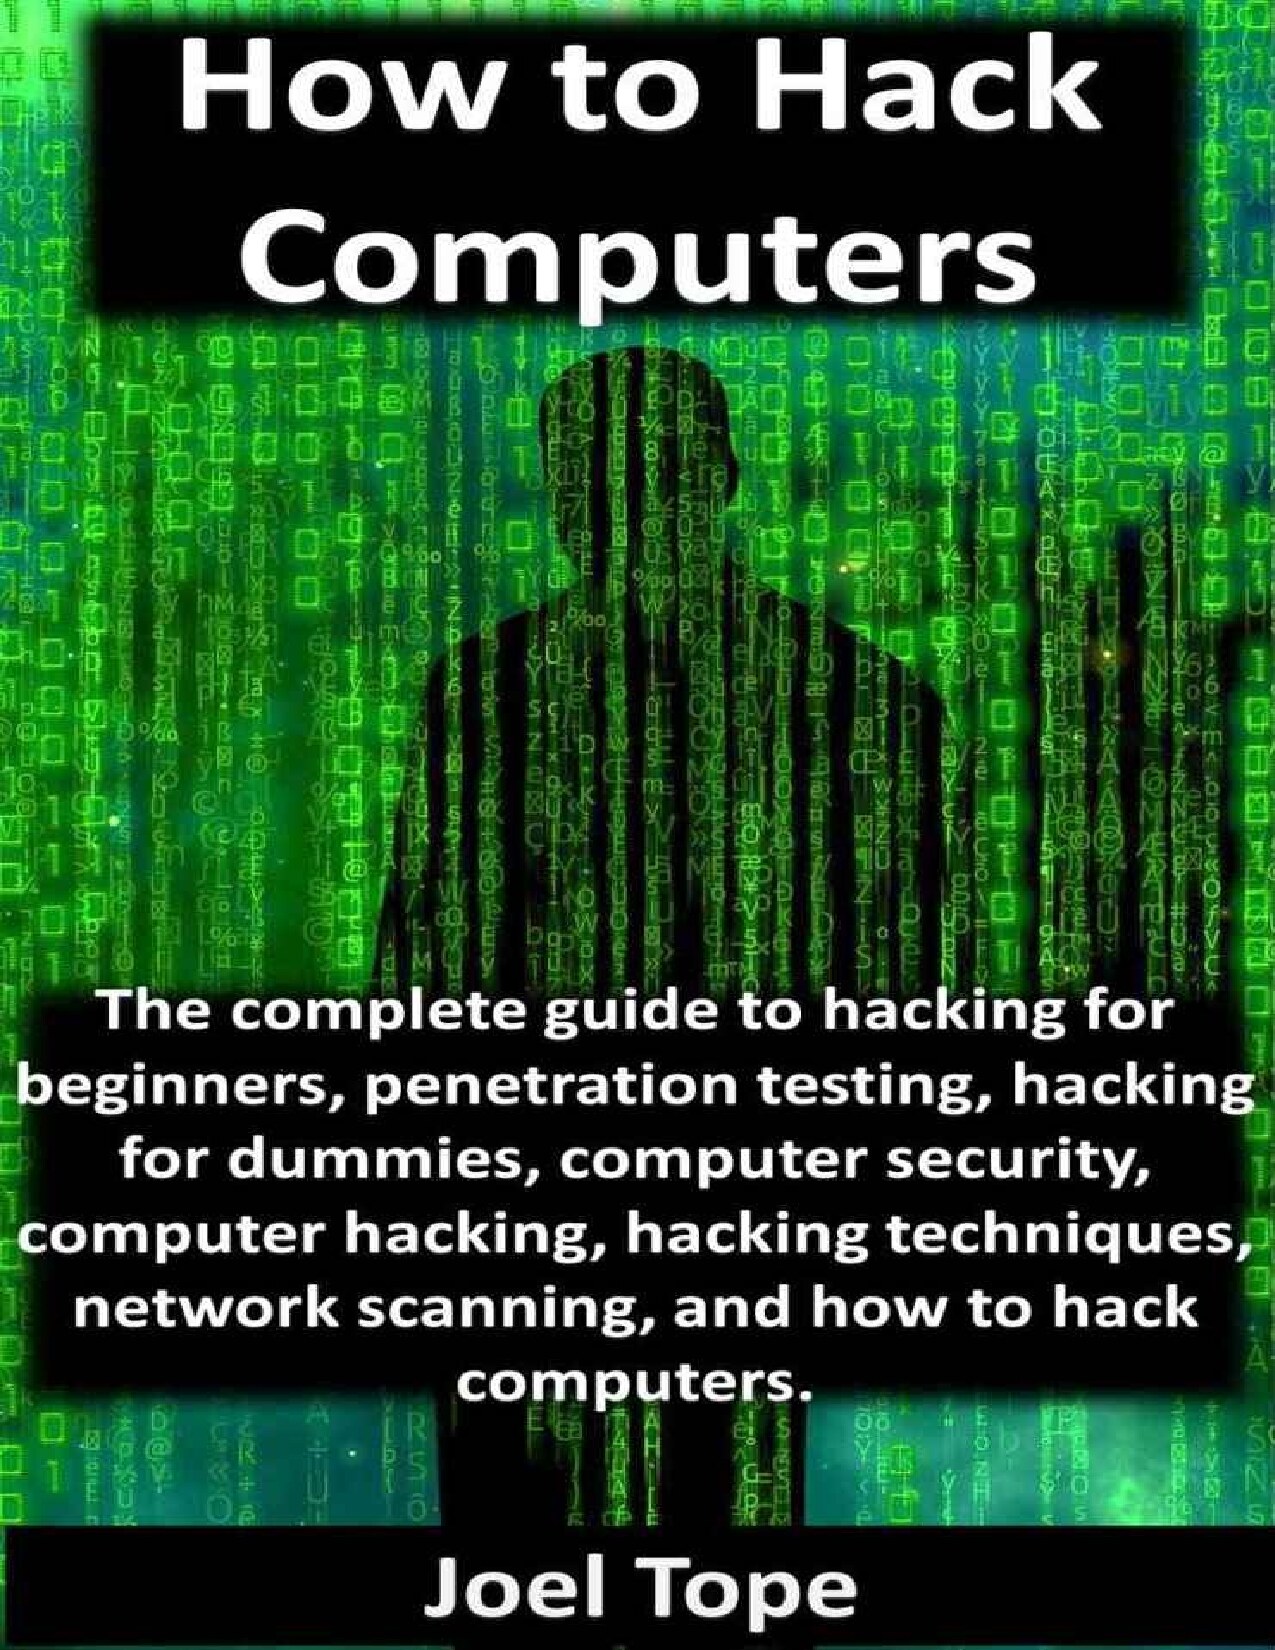 How to Hack Computers: how to hack computers, hacking for beginners, penetration testing, hacking for dummies, computer security, computer hacking, hacking techniques, network scanning - PDFDrive.com